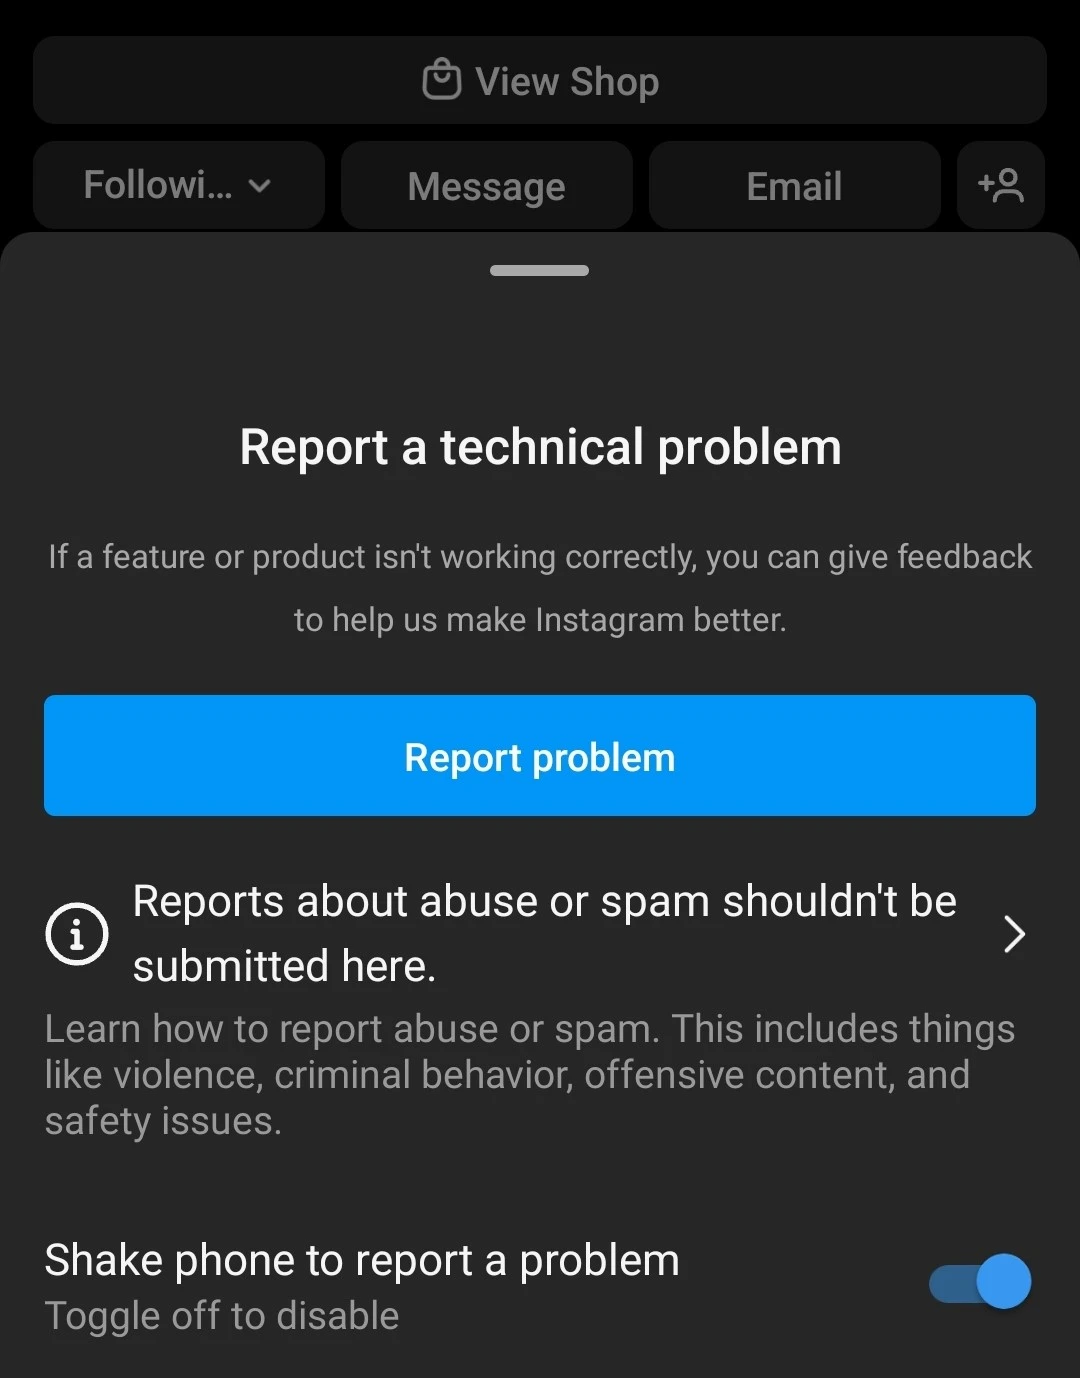 Shake to report a problem on Instagram